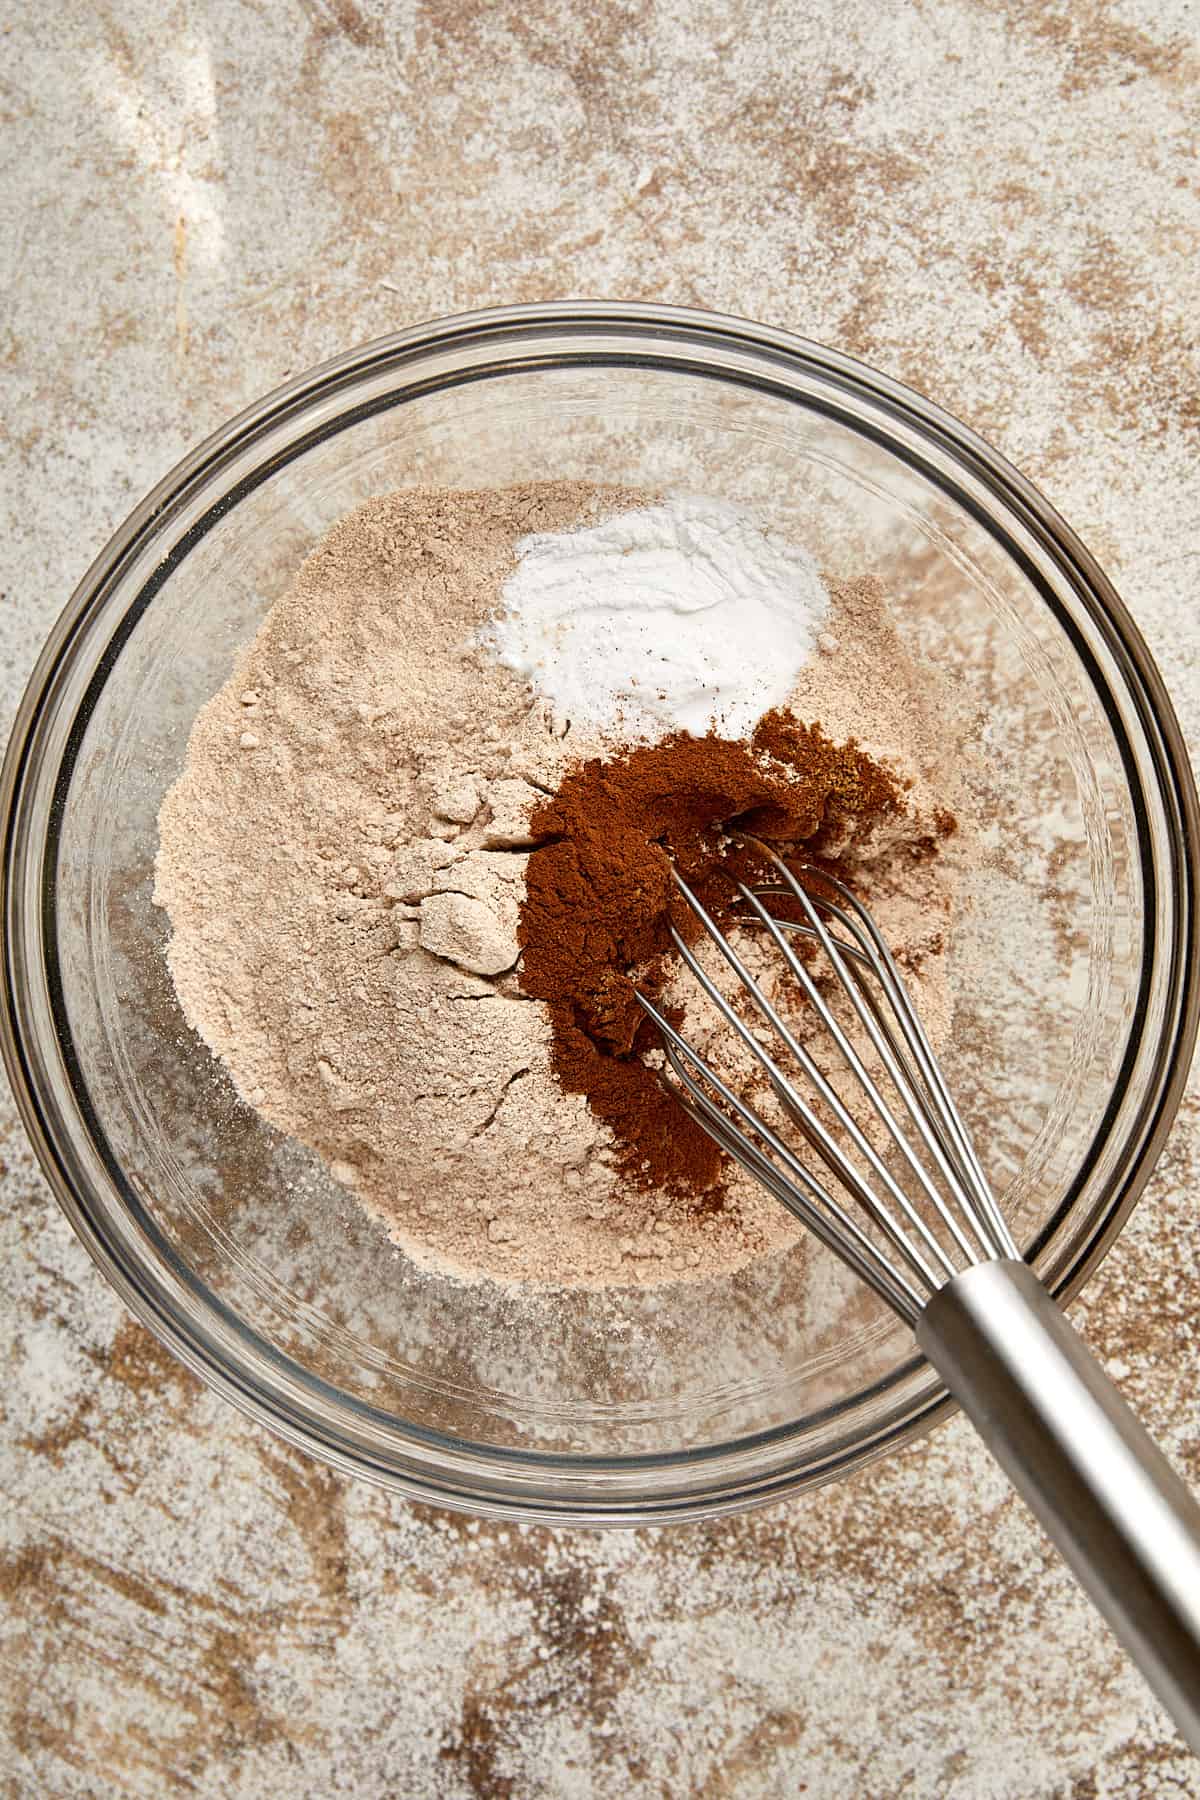 whole wheat flour, baking powder, baking soda, cinnamon, grated nutmeg, and coriander with a whisk.